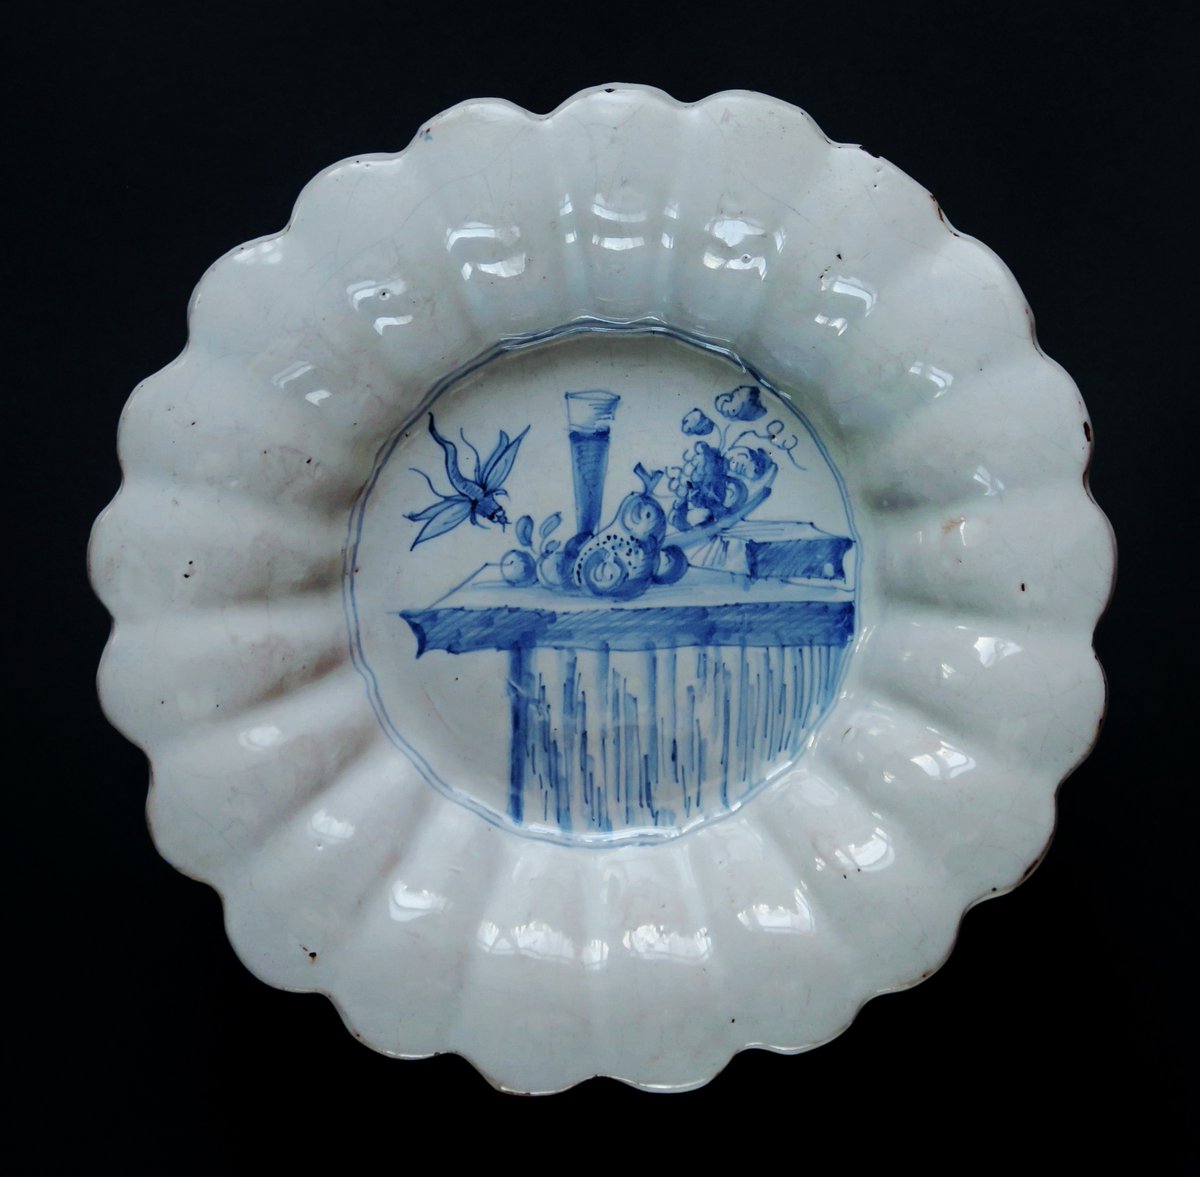 @rijksmuseum And what do you think about this fellow? What kind of insect? A very rare, probably Haarlem #faience, 1640, fluted dish, 28cm. C.EvD. #rijksmseum #vermeer #Goldenage #China #porcelain #pottery #maiolica #tinglaze #Delftblue #antiqueDelft #Dutchdelft #antiqueceramics #delftware